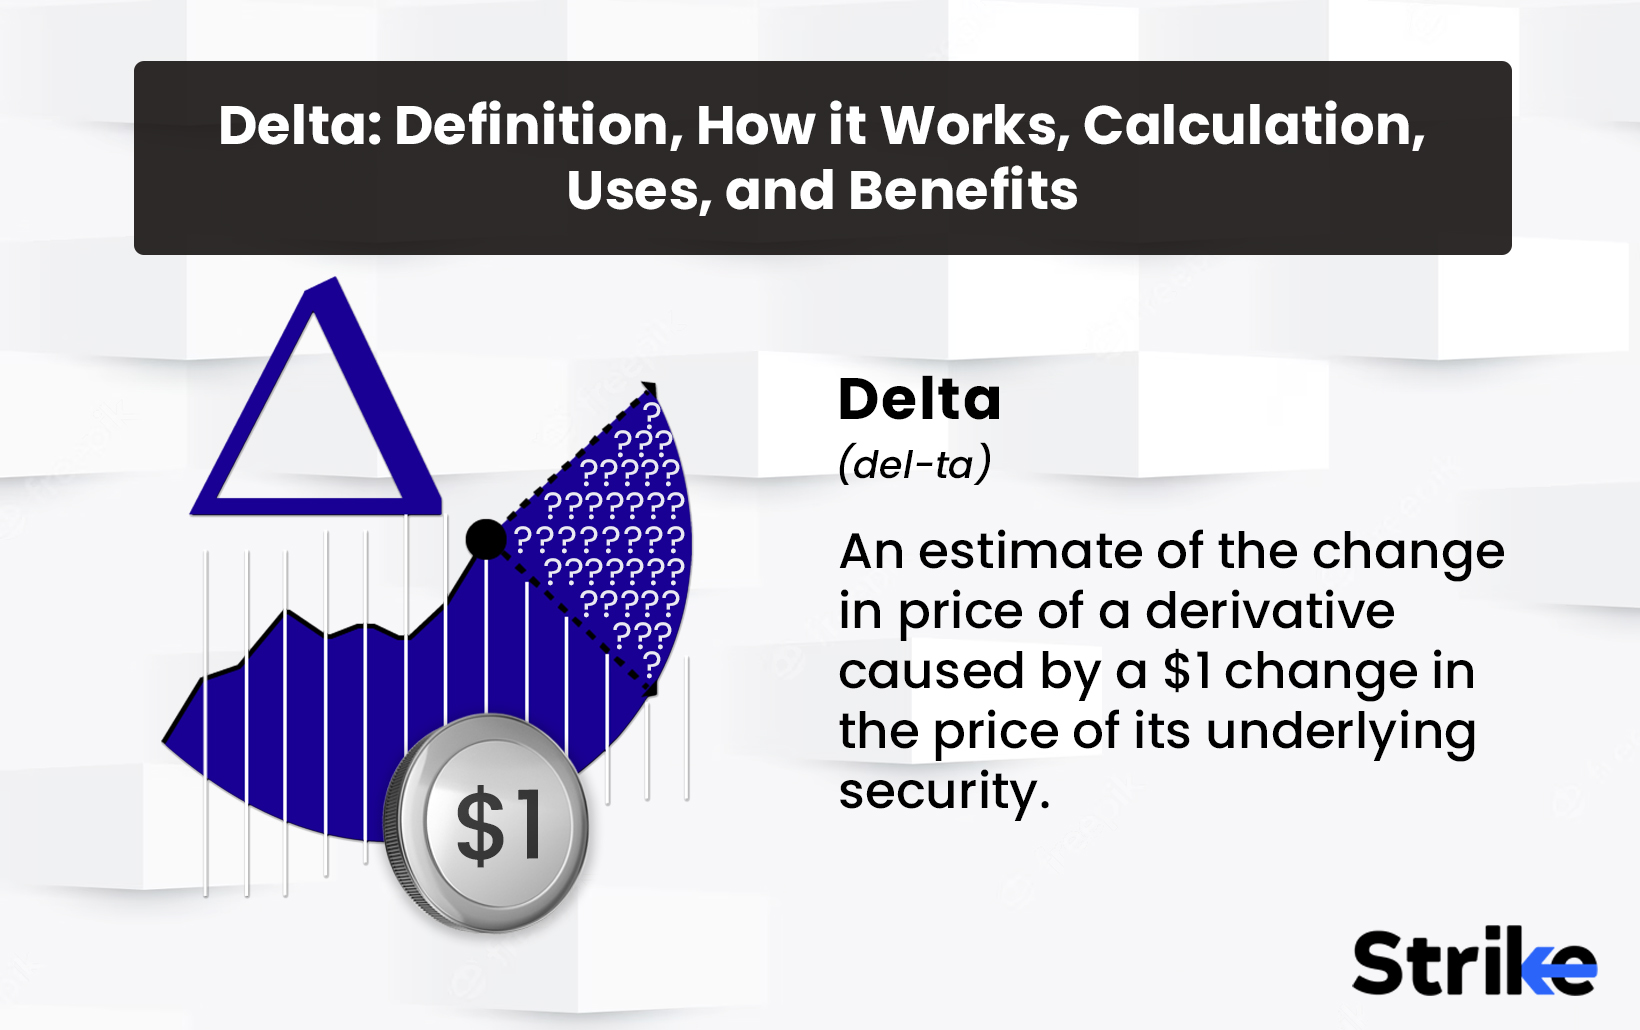 Delta: Definition, How it Works, Calculation, Uses, and Benefits